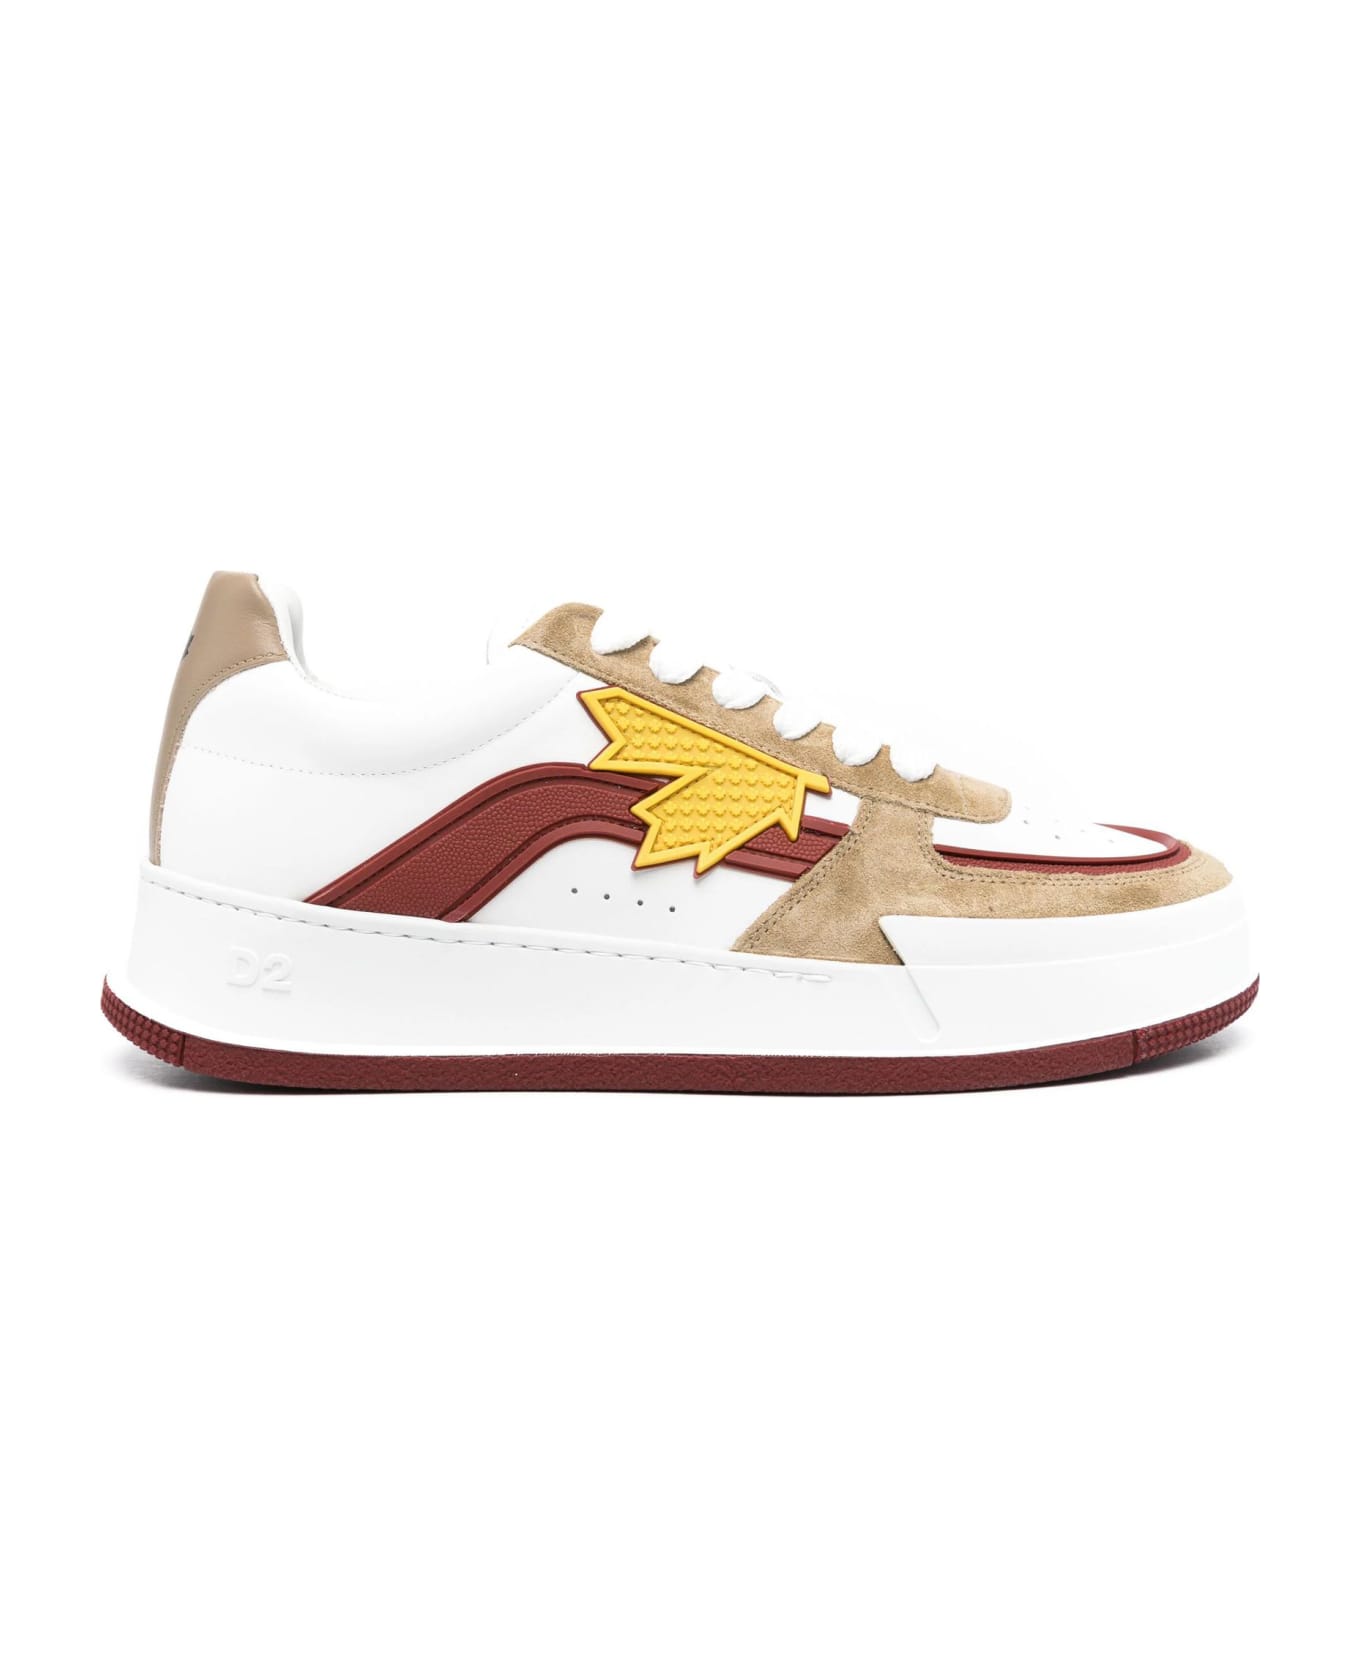 Dsquared2 Sneakers - White スニーカー